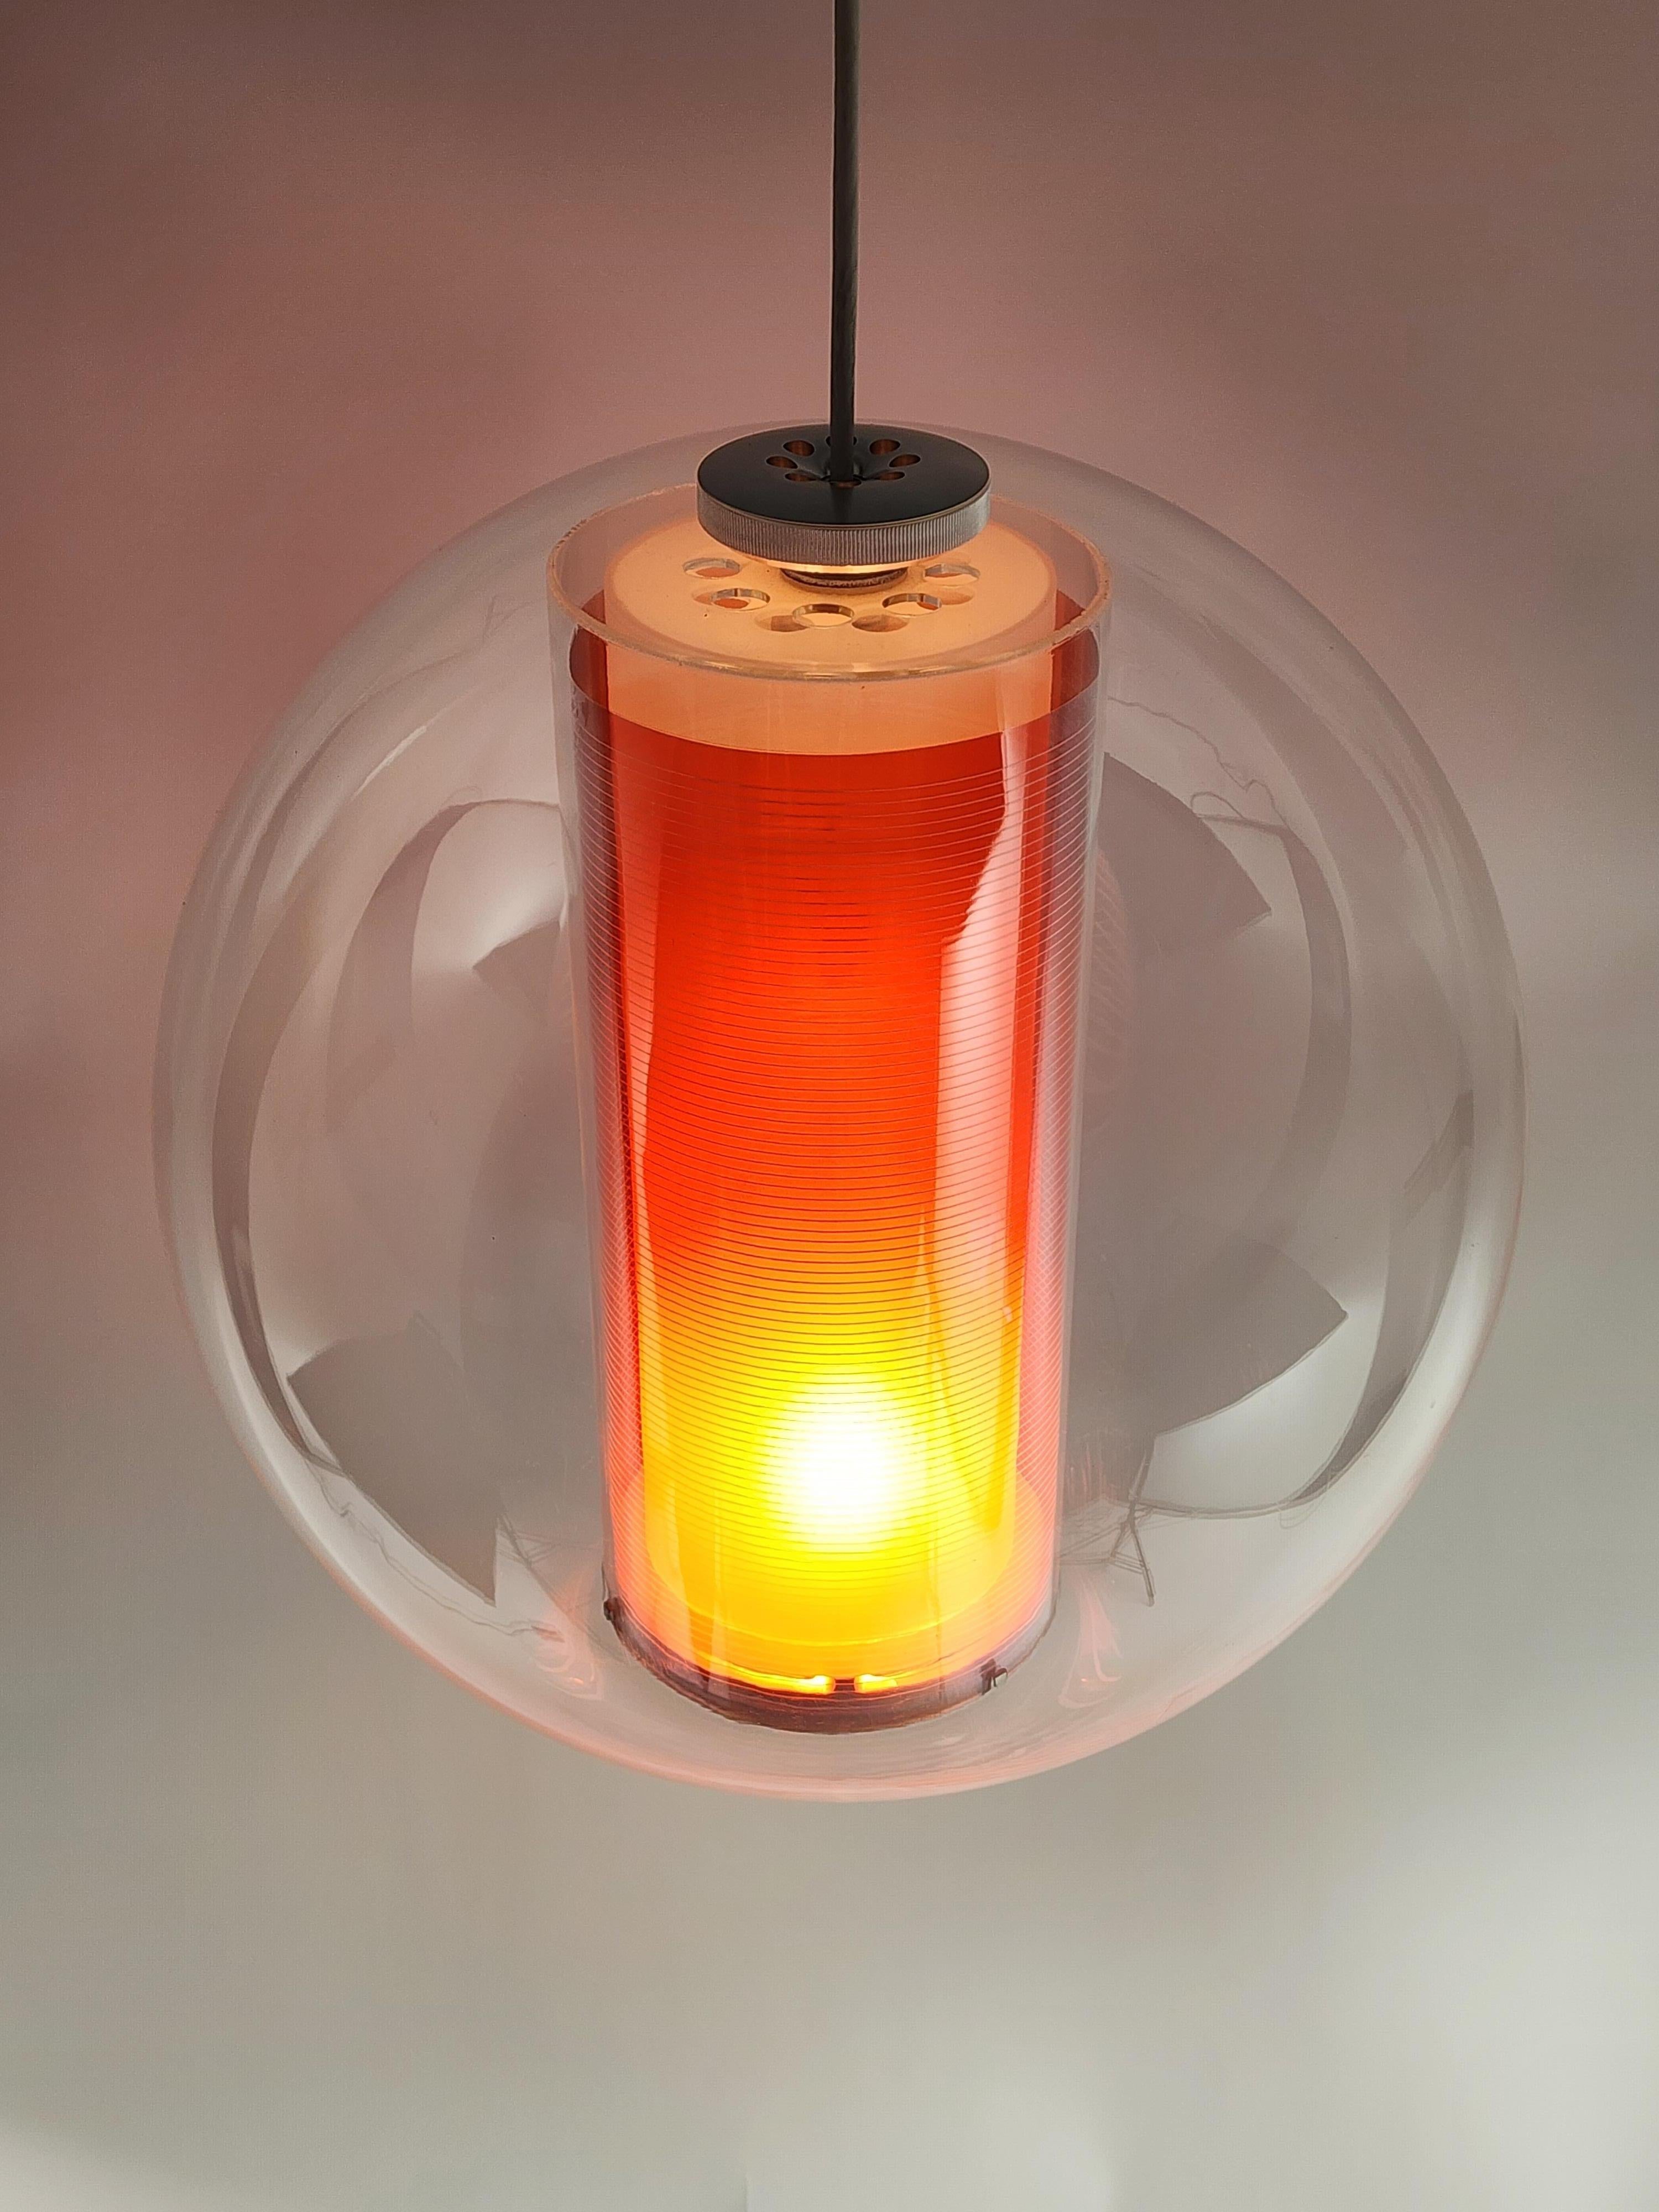 2000s Clear Acrylic Pendant with Orange Sleeve, USA For Sale 3